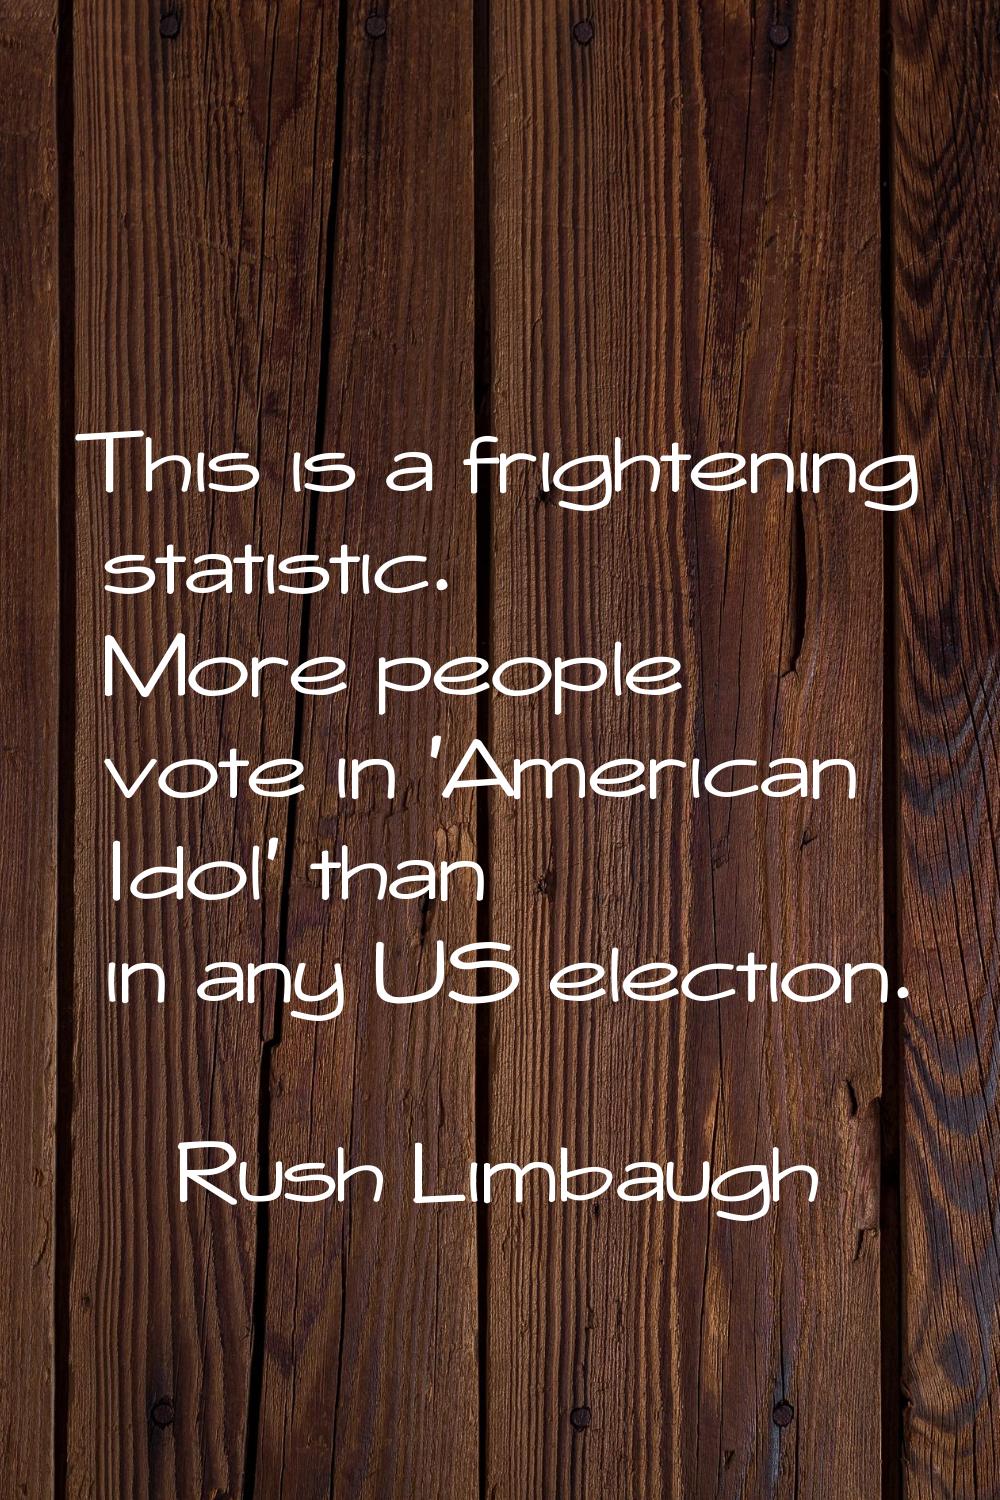 This is a frightening statistic. More people vote in 'American Idol' than in any US election.